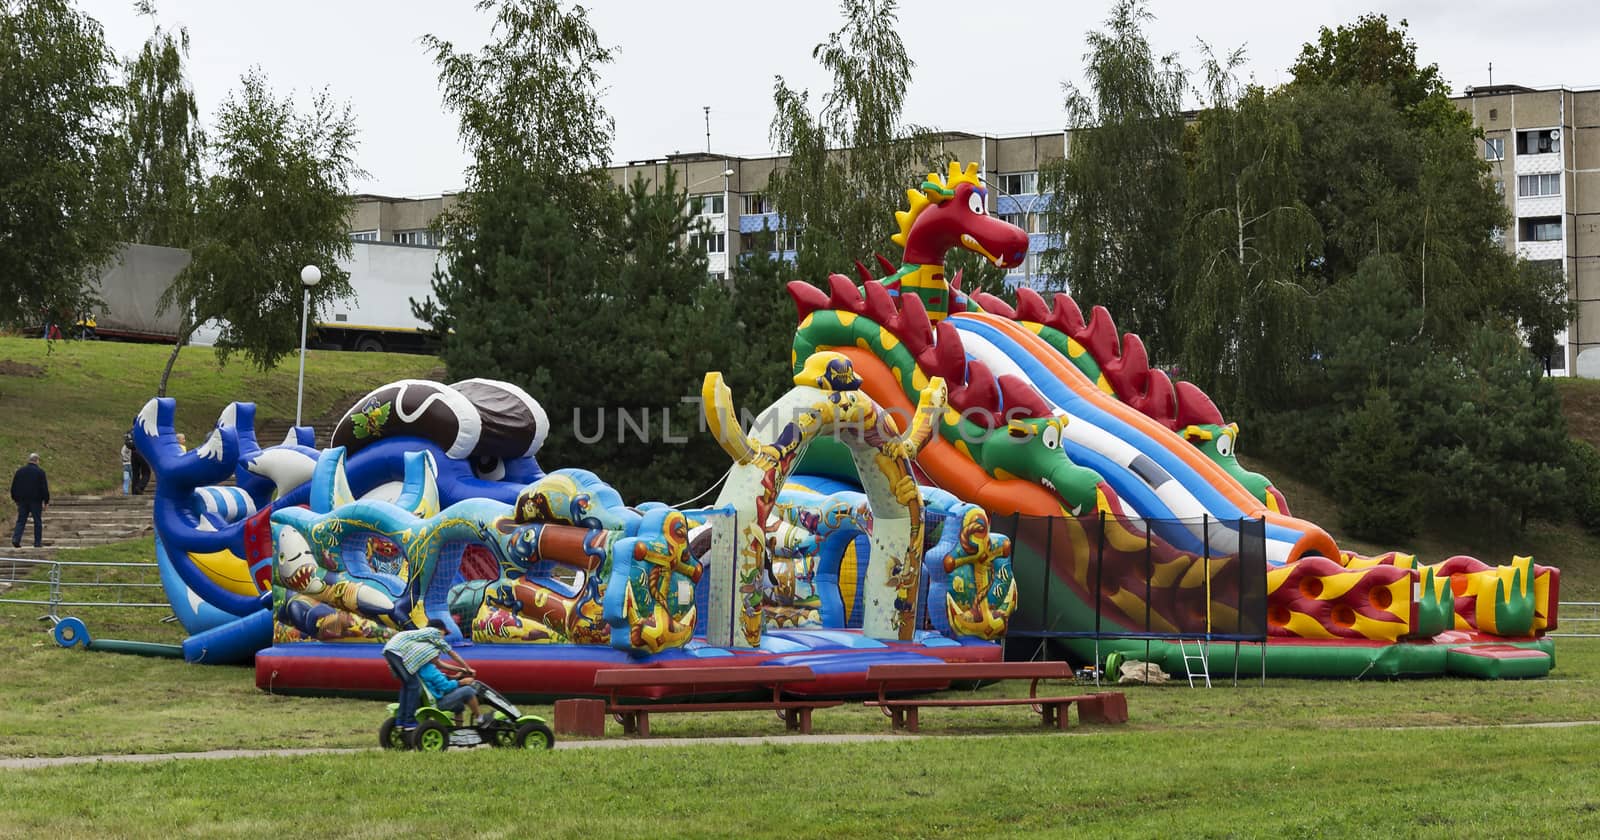 Children's inflatable playground by Grommik